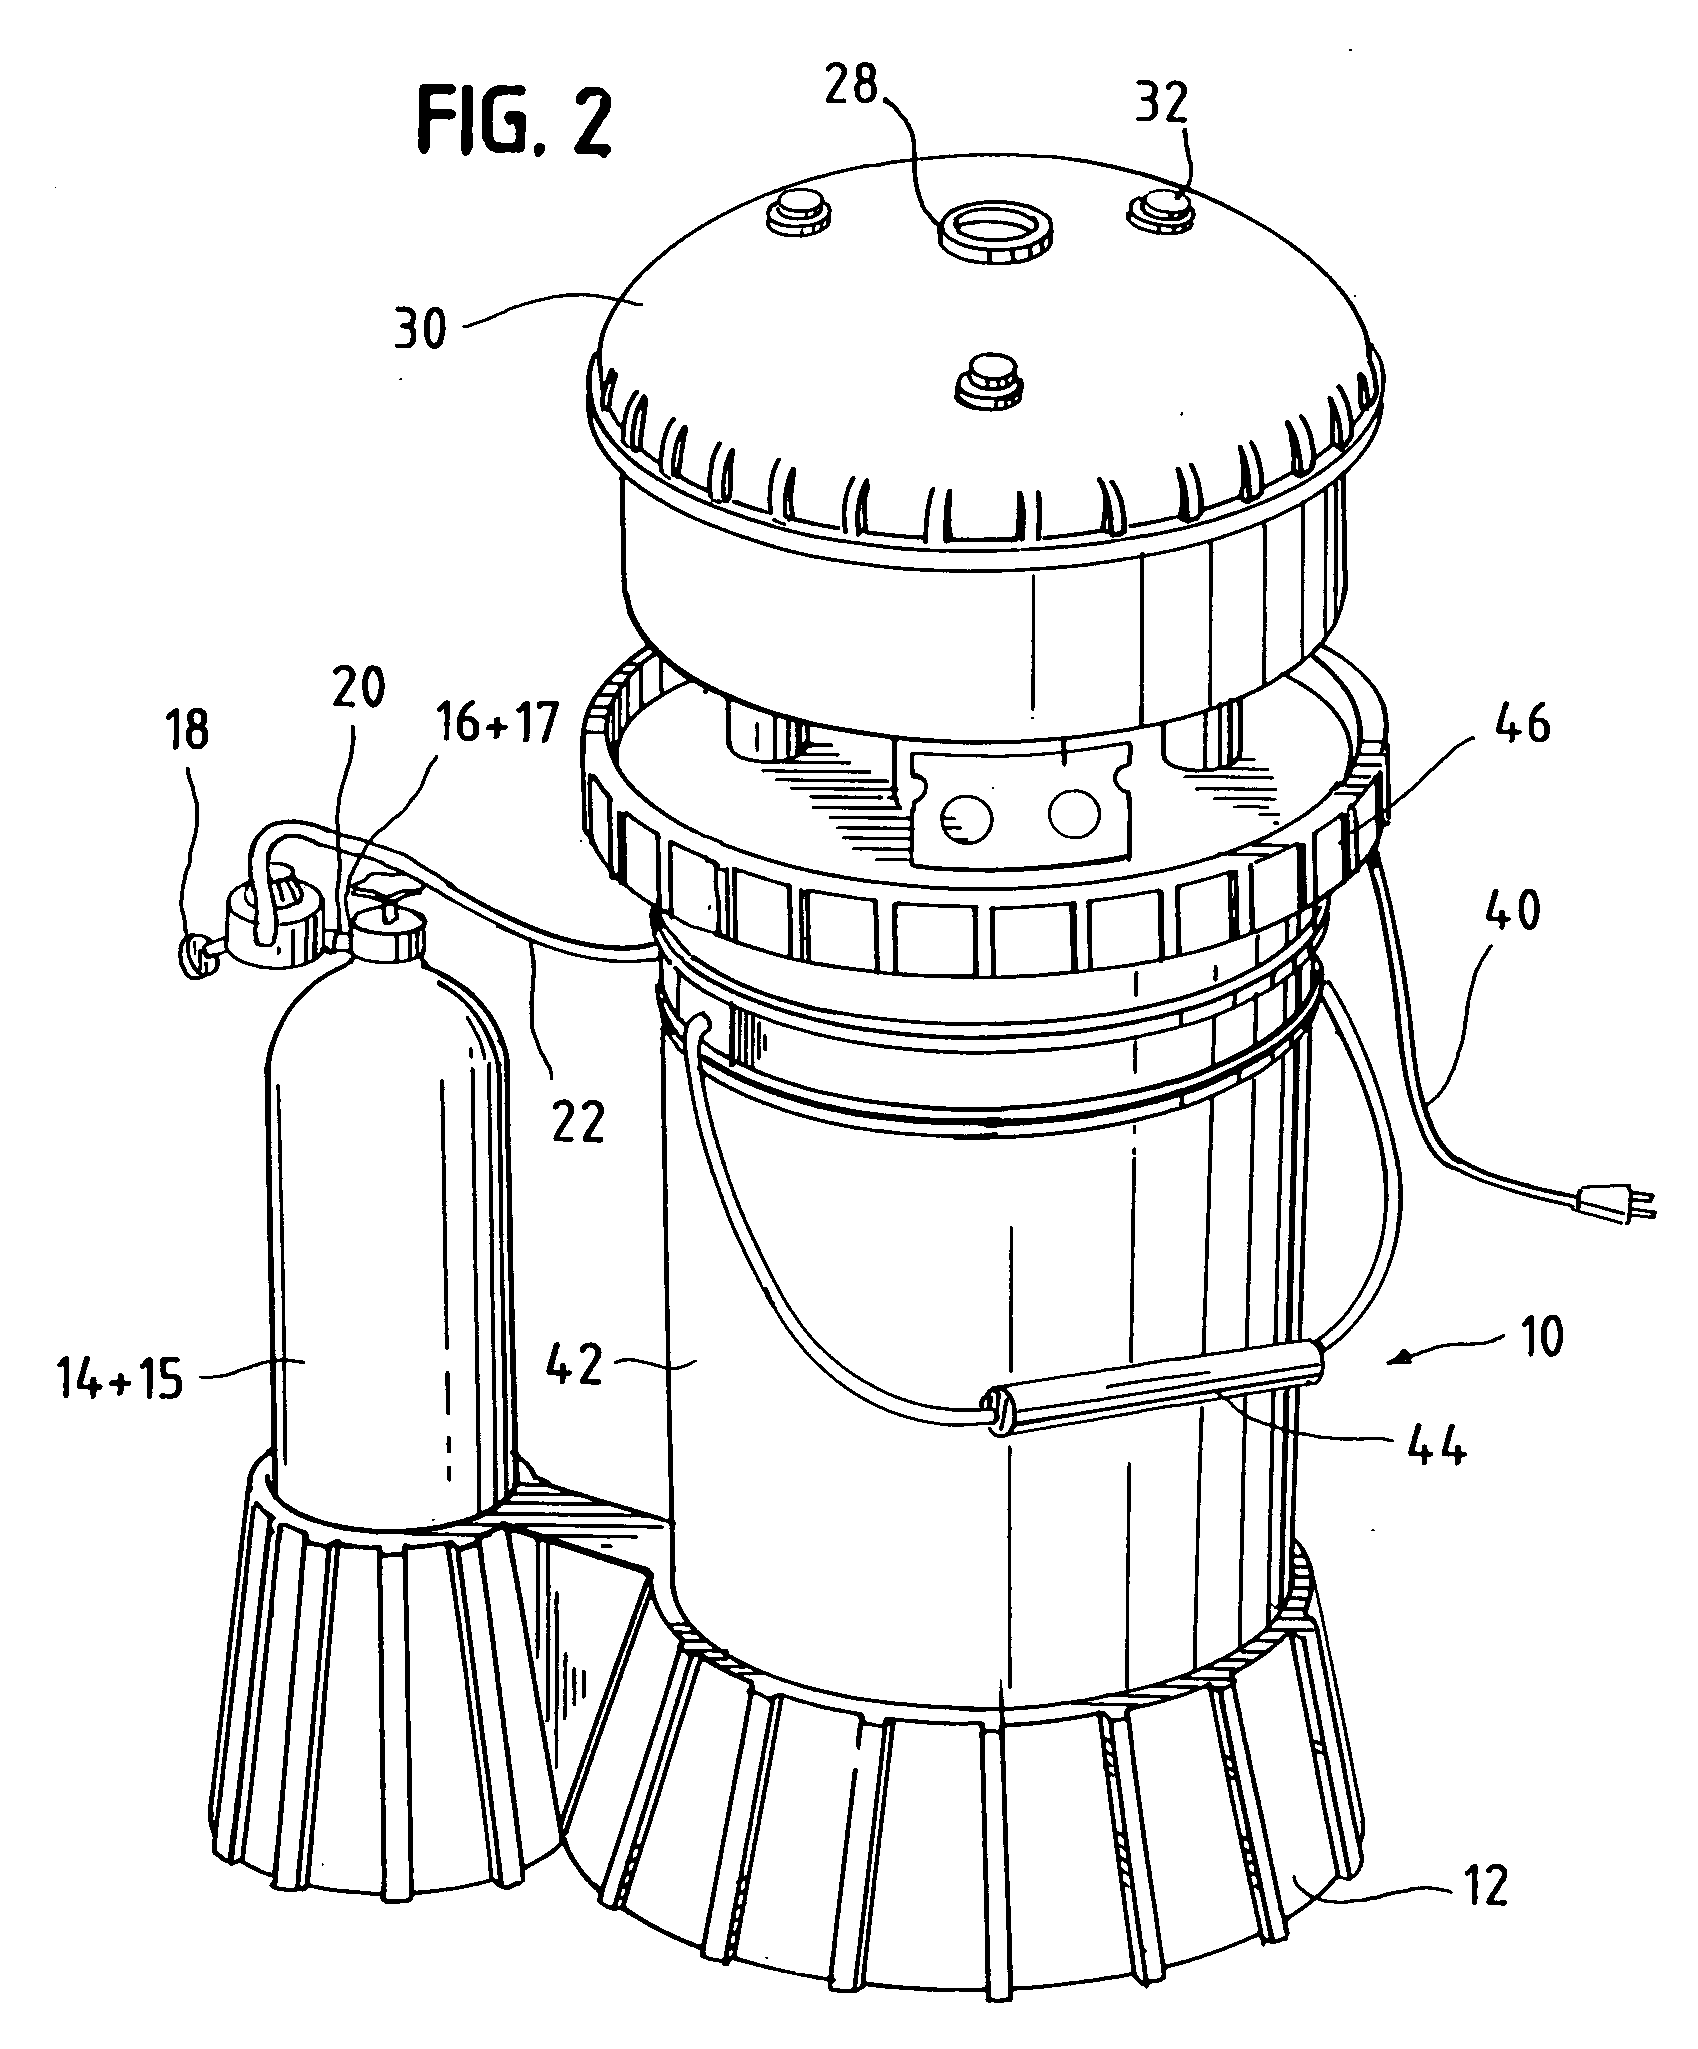 Device and method for converting a container into an insect trapping device